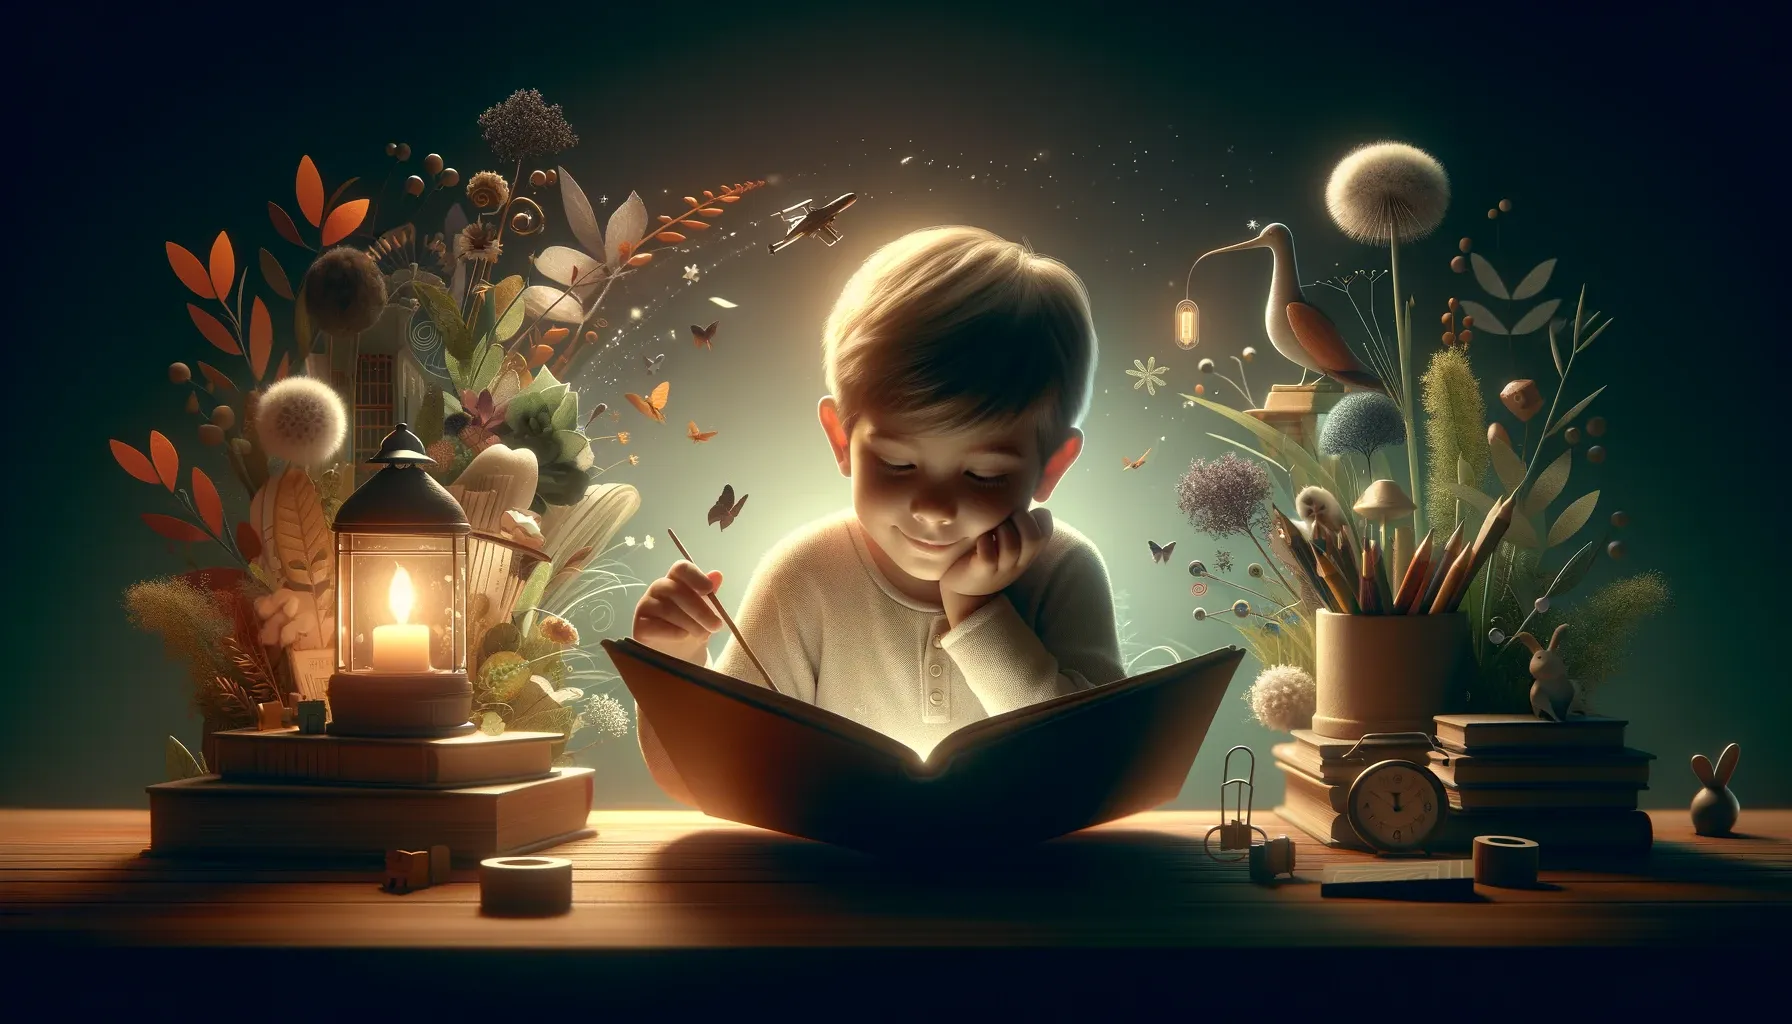 A heartwarming scene of a child reading a book, fully engrossed and smiling softly, in a cozy and nurturing environment, symbolizing the joy of children's literature.